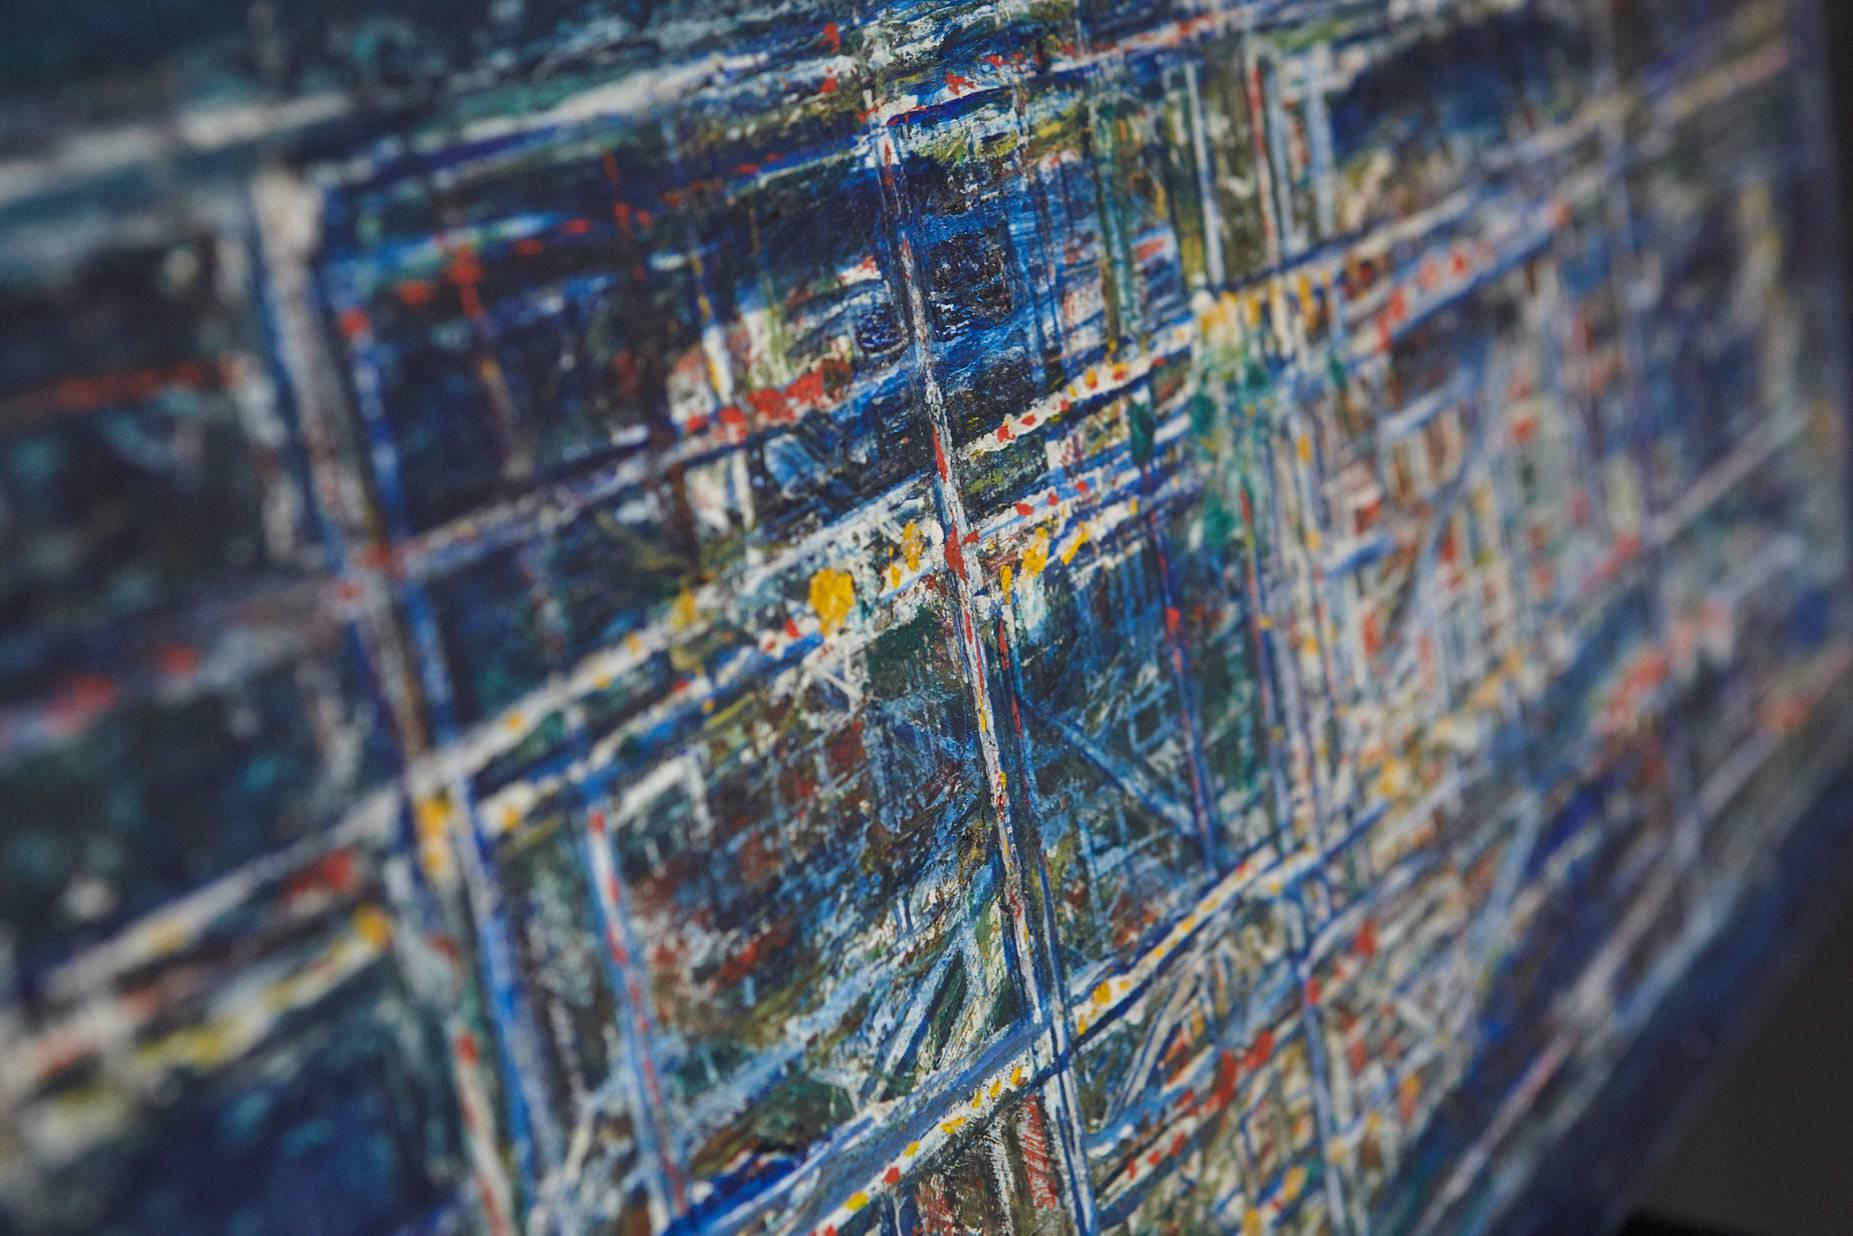 Scaffolding - Abstract Expressionist Painting by Sadie Hayms